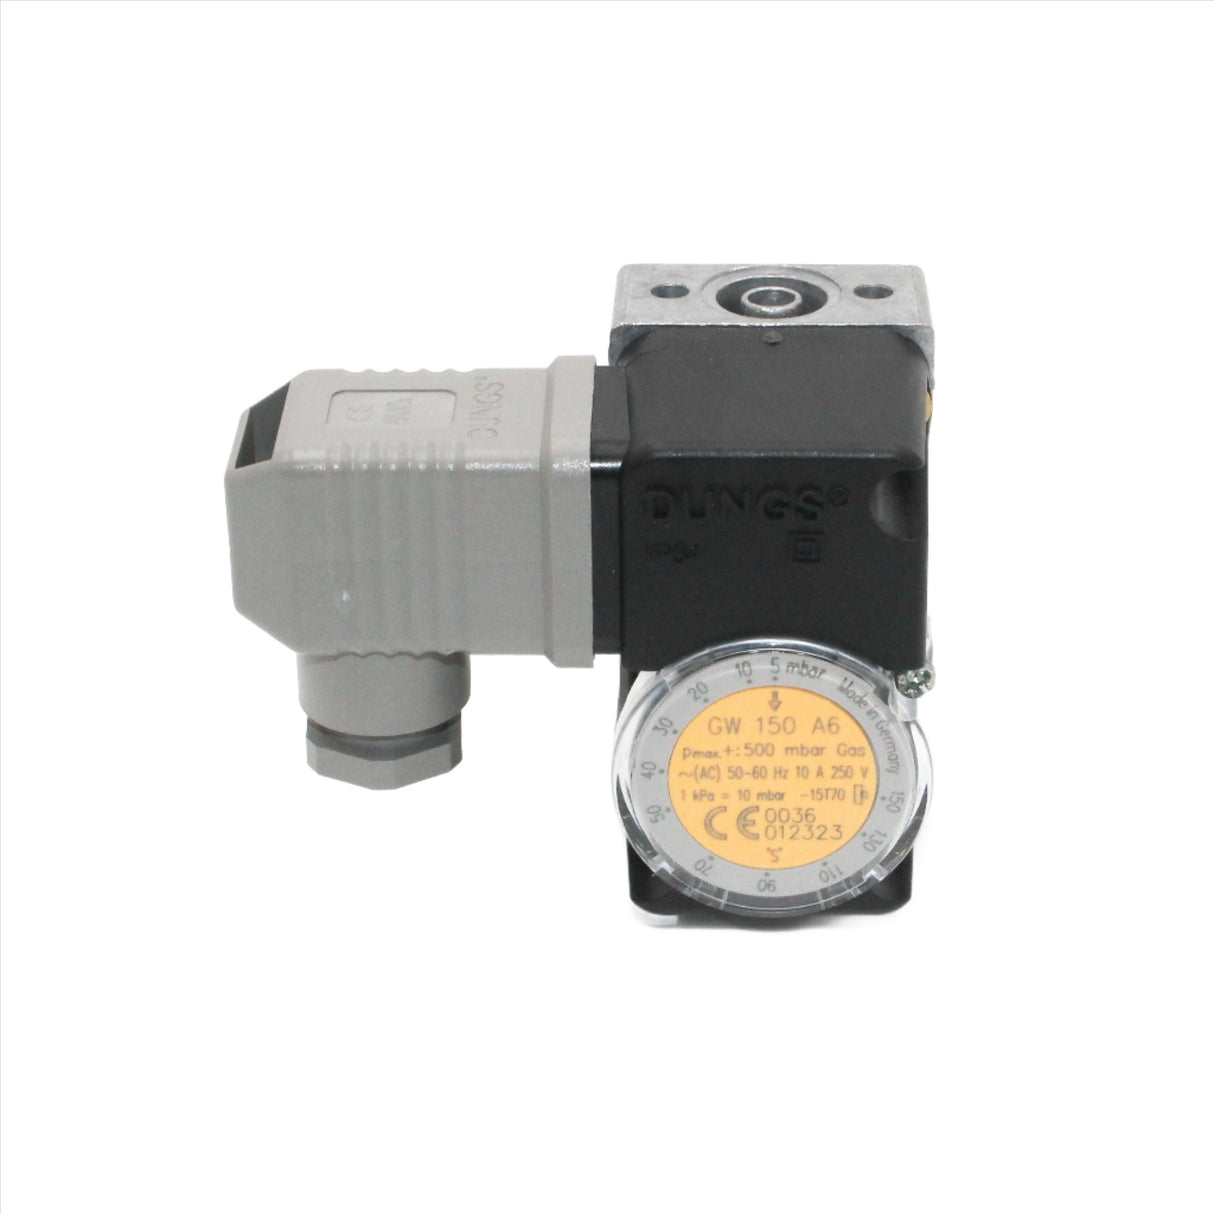 Dungs GW500 A6 100-500mbar Compact Pressure Switch